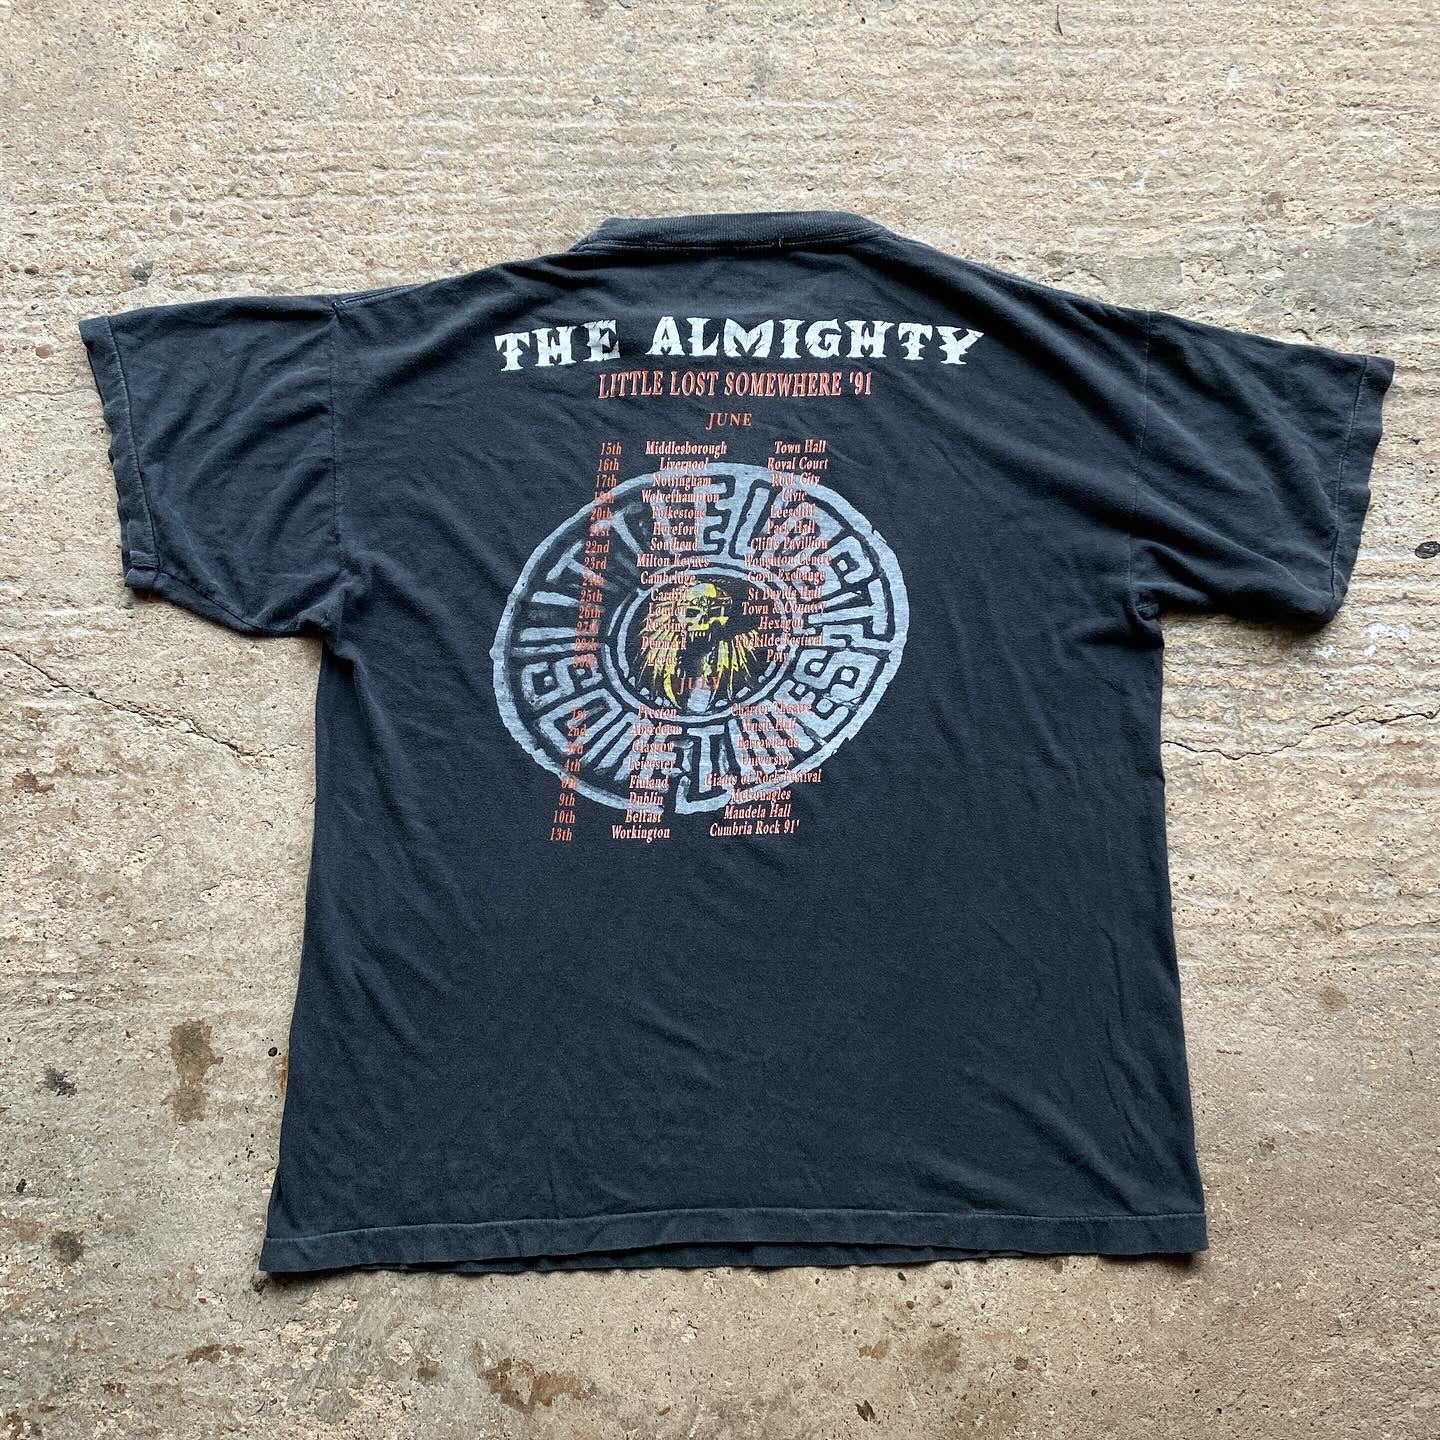 The Almighty - 'Little Lost Somewhere' - 1991 - XL